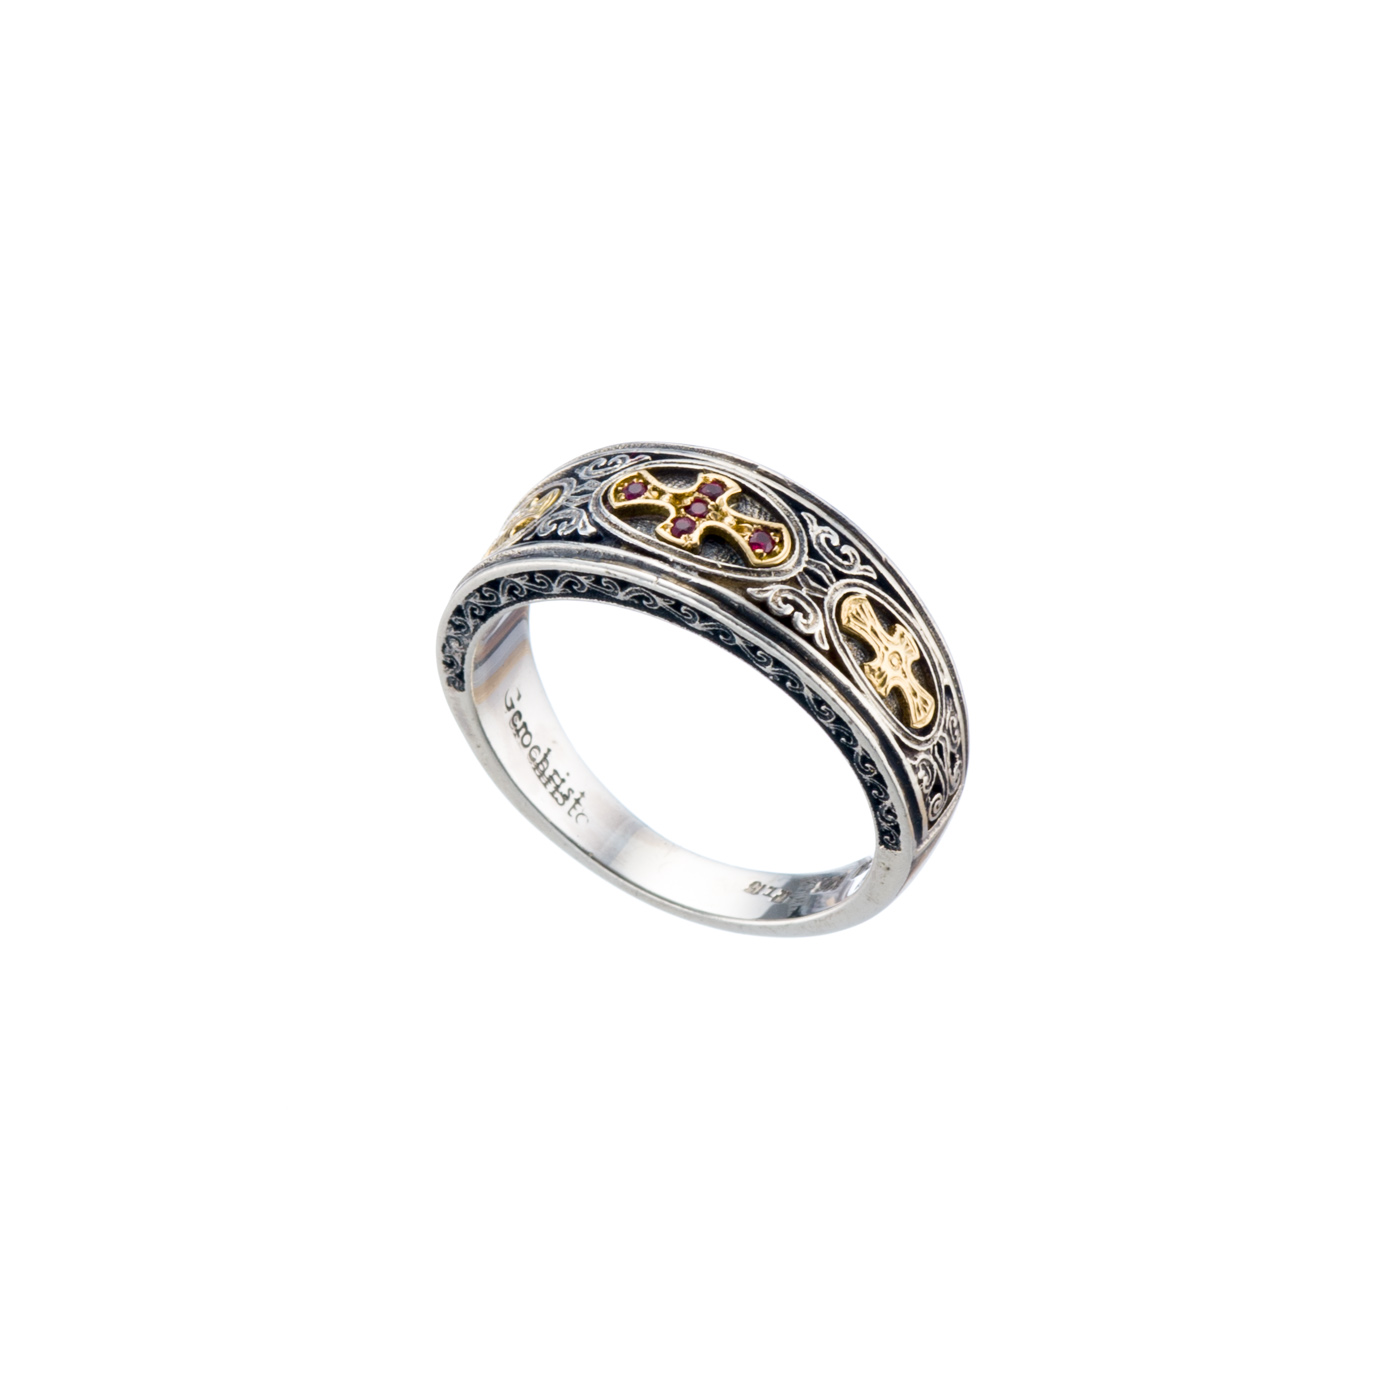 Patmos Ring in 18K Gold and Sterling silver with rubies